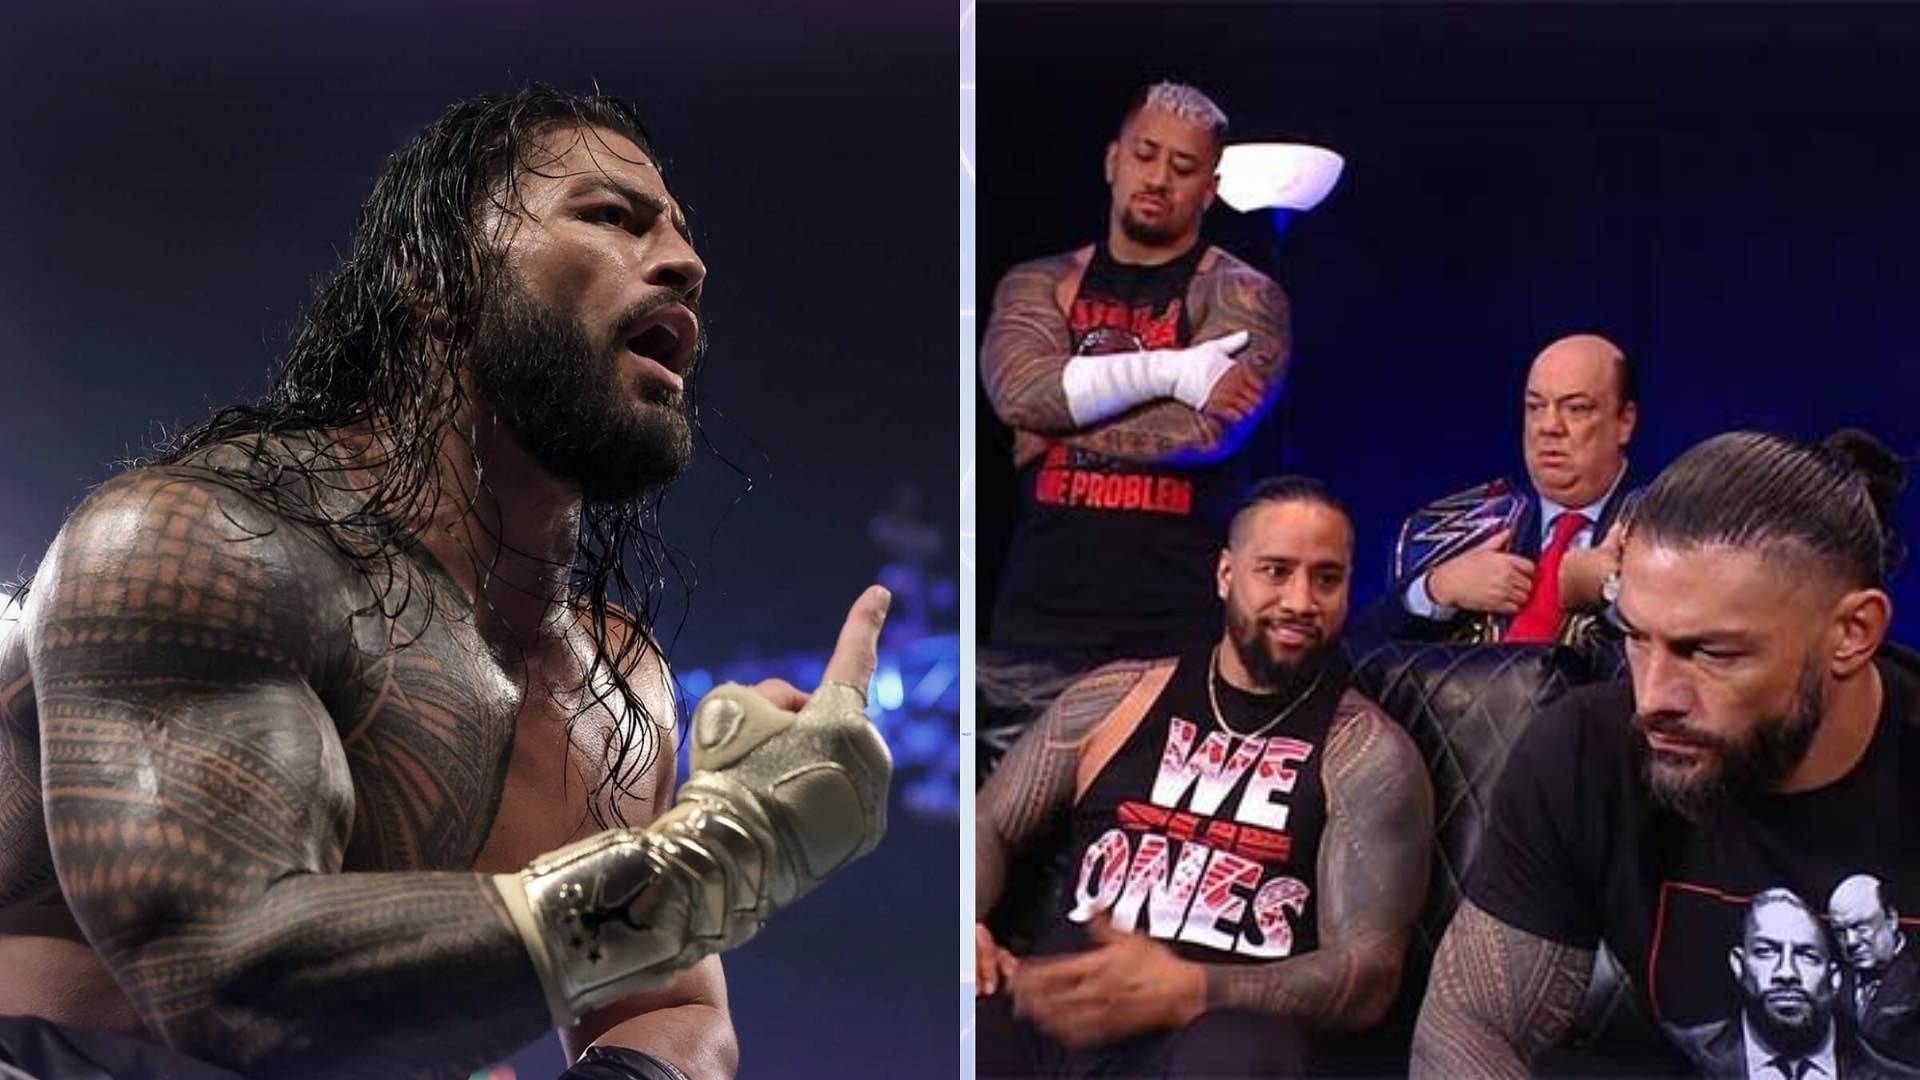 Roman Reigns and The Bloodline will appear on WWE SmackDown